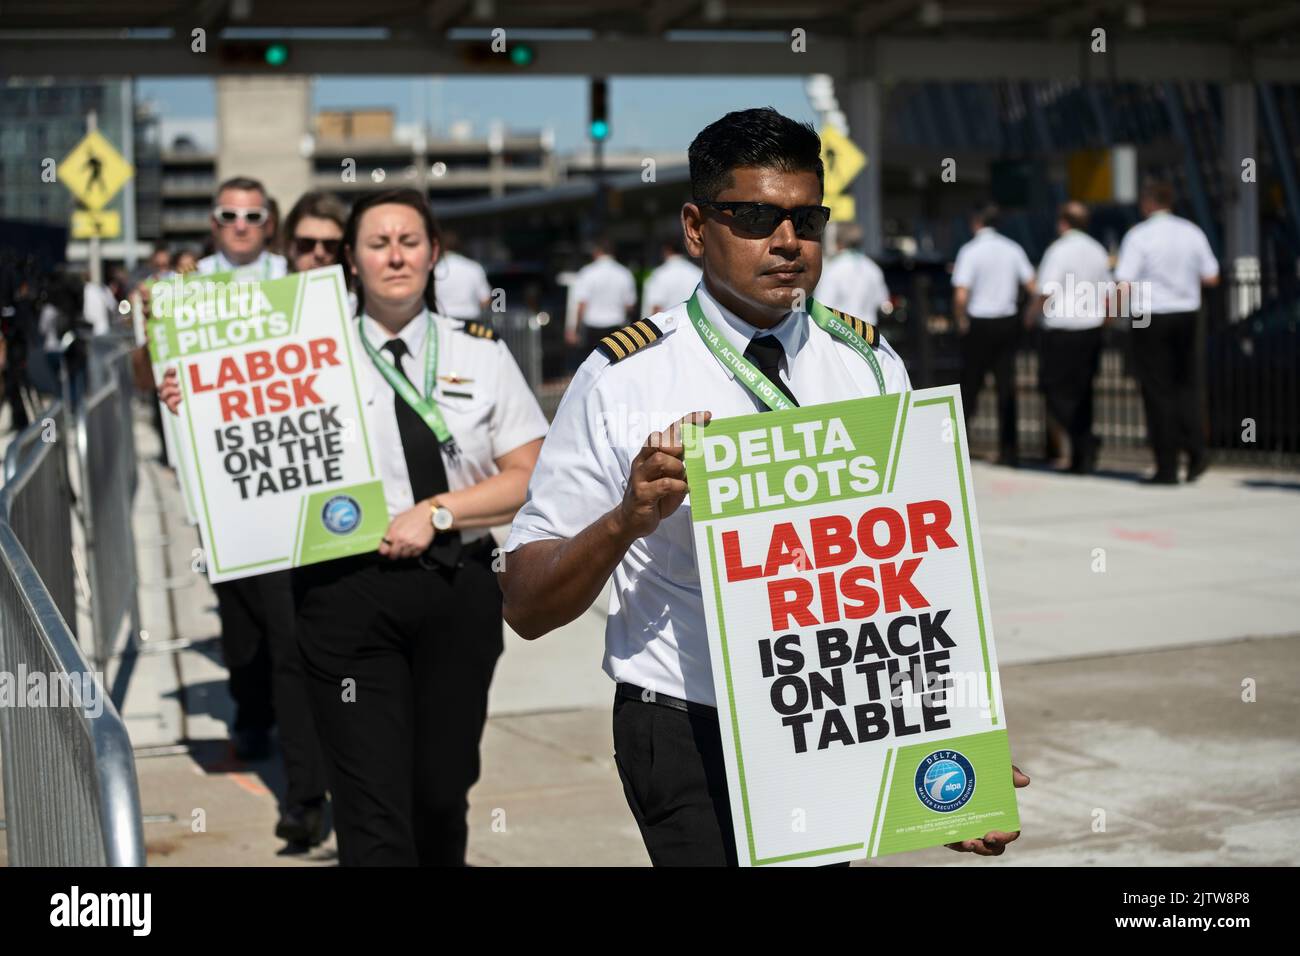 Queens, New York, USA 1st September, 2022 On Thursday before U.S. Labor Day holiday weekend, off-duty Delta Airlines pilots, members of Air Line Pilots Association, picket outside Delta terminal at JFK Airport to protest against lengthy contract negotiations which began in April 2019 and were paused for two years during pandemic, resuming in January of 2022. ALPA says pilots have been flying “historic levels of overtime” due to return of travel demand and said it was picketing at at least one dozen U.S. airports. Stock Photo